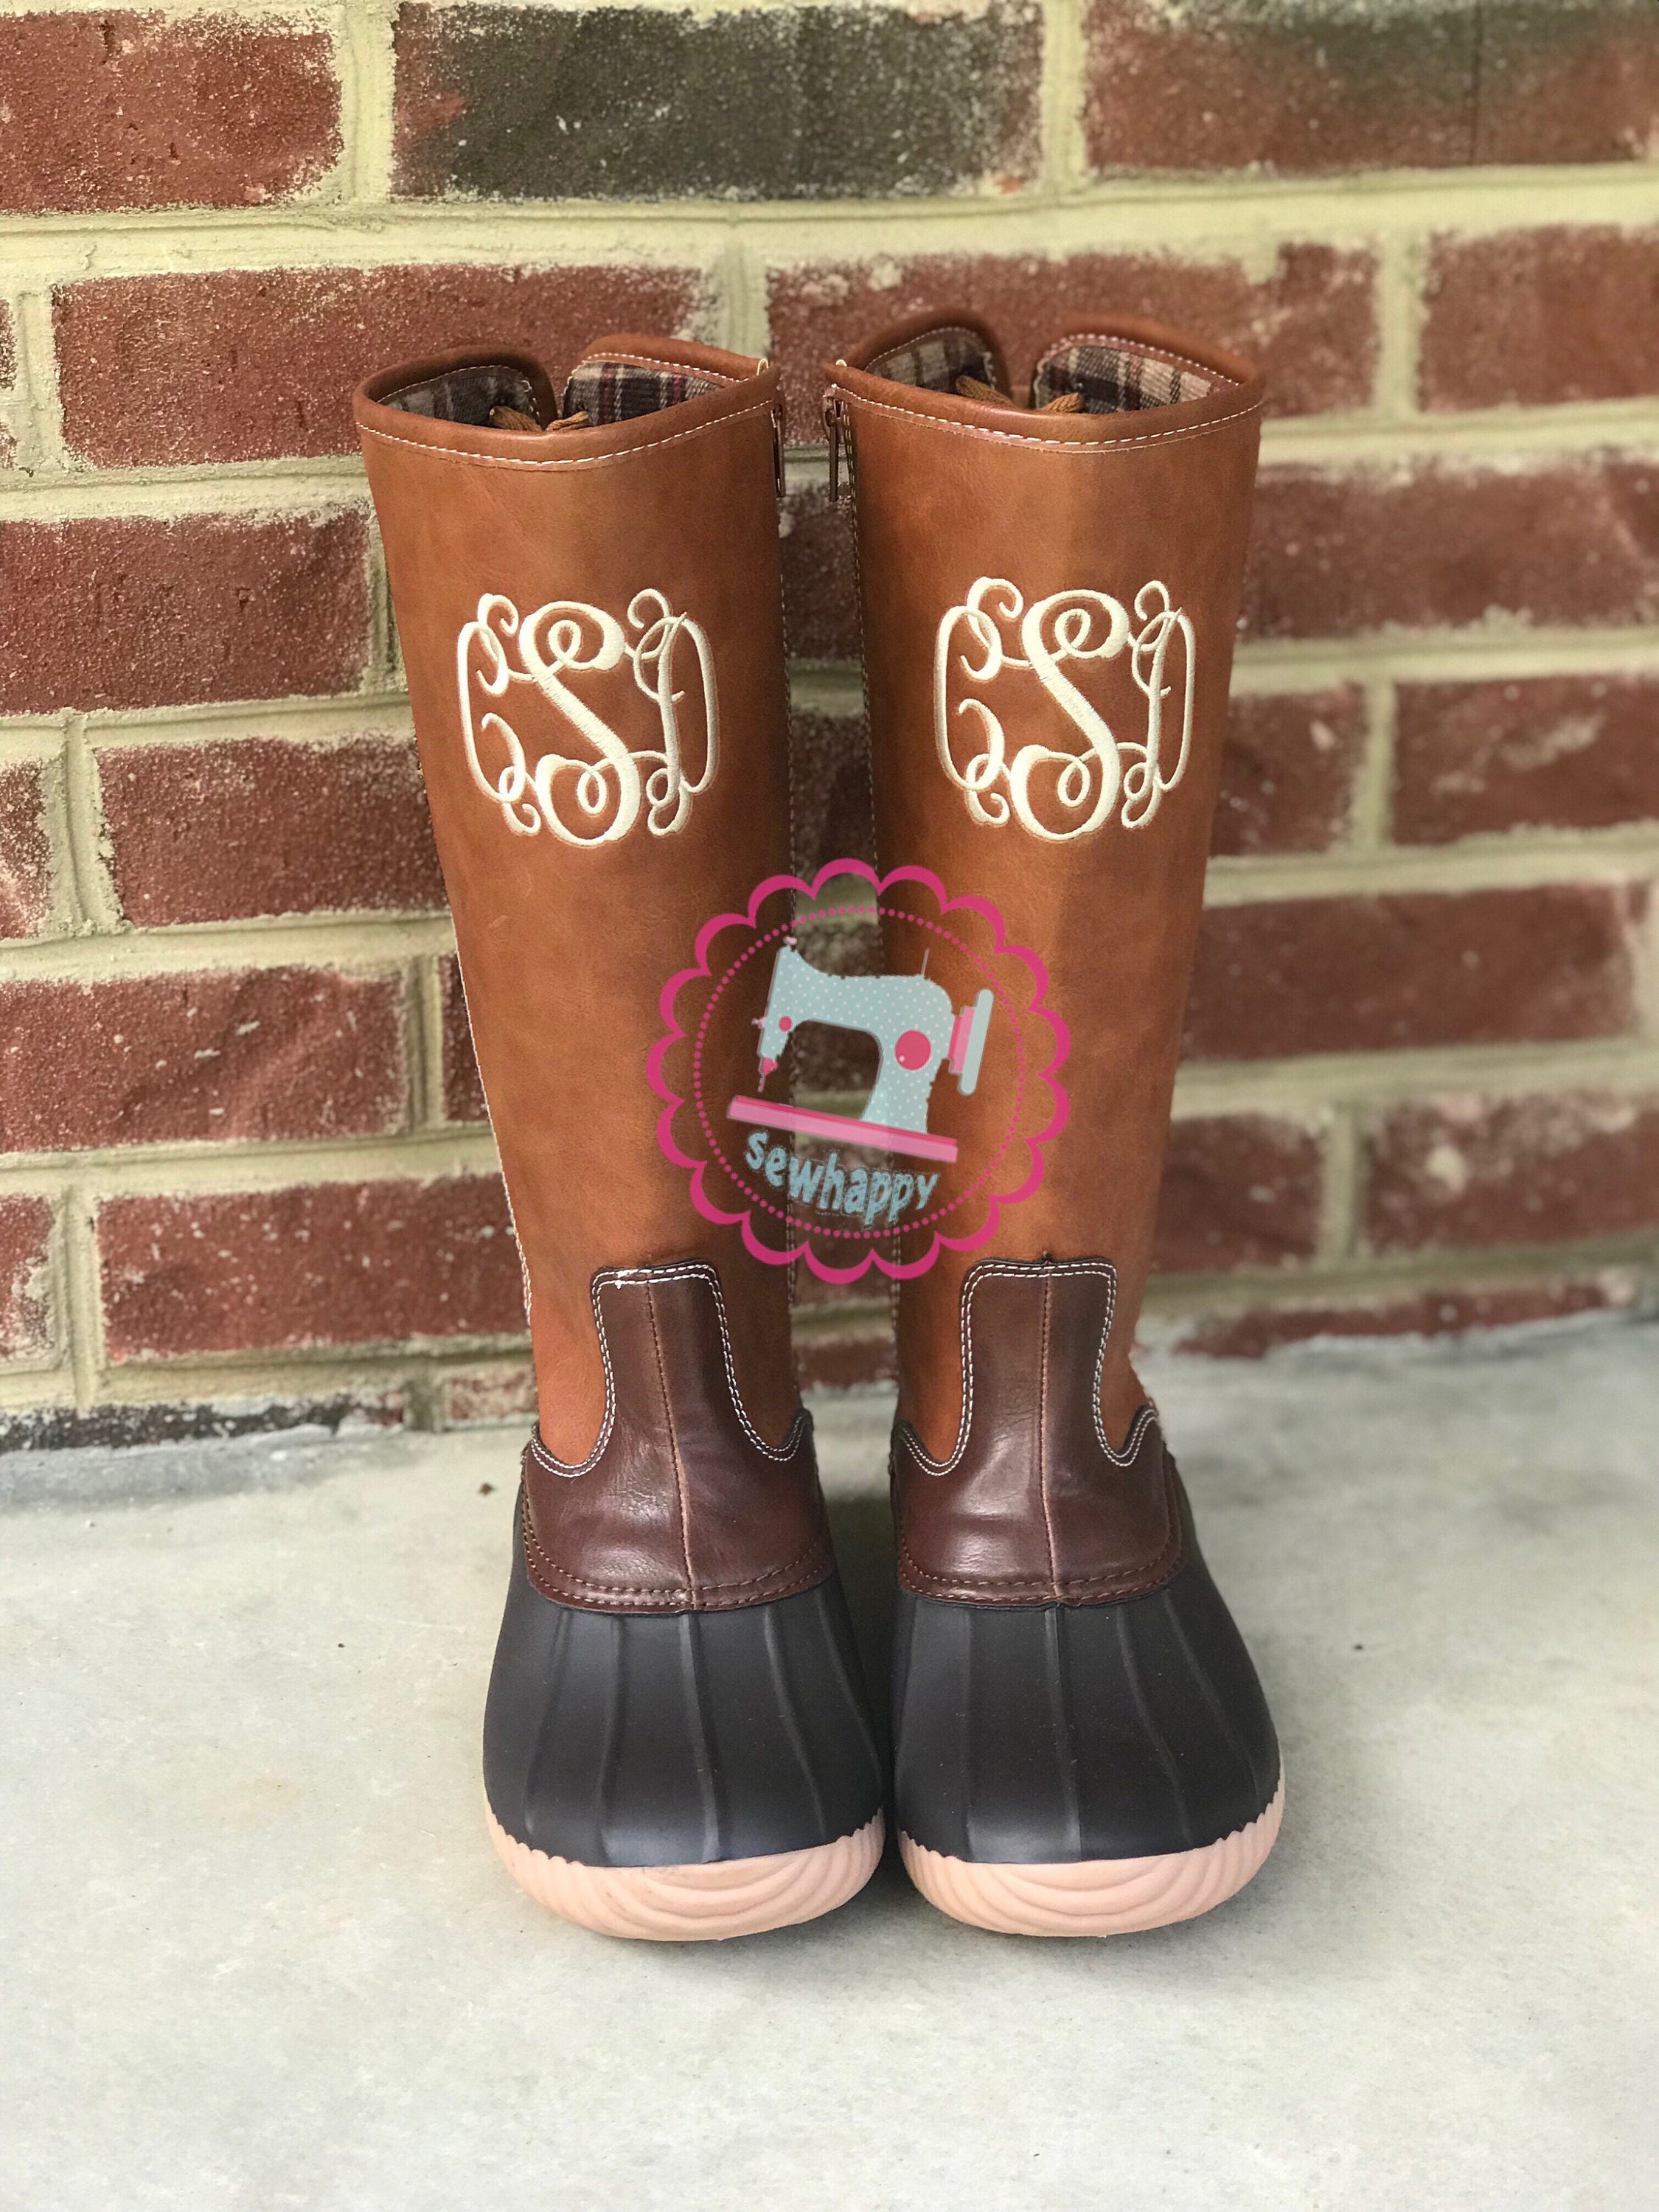 Brown Lace Up monogrammed Tall Duck Boots Rainboots Duck | Etsy